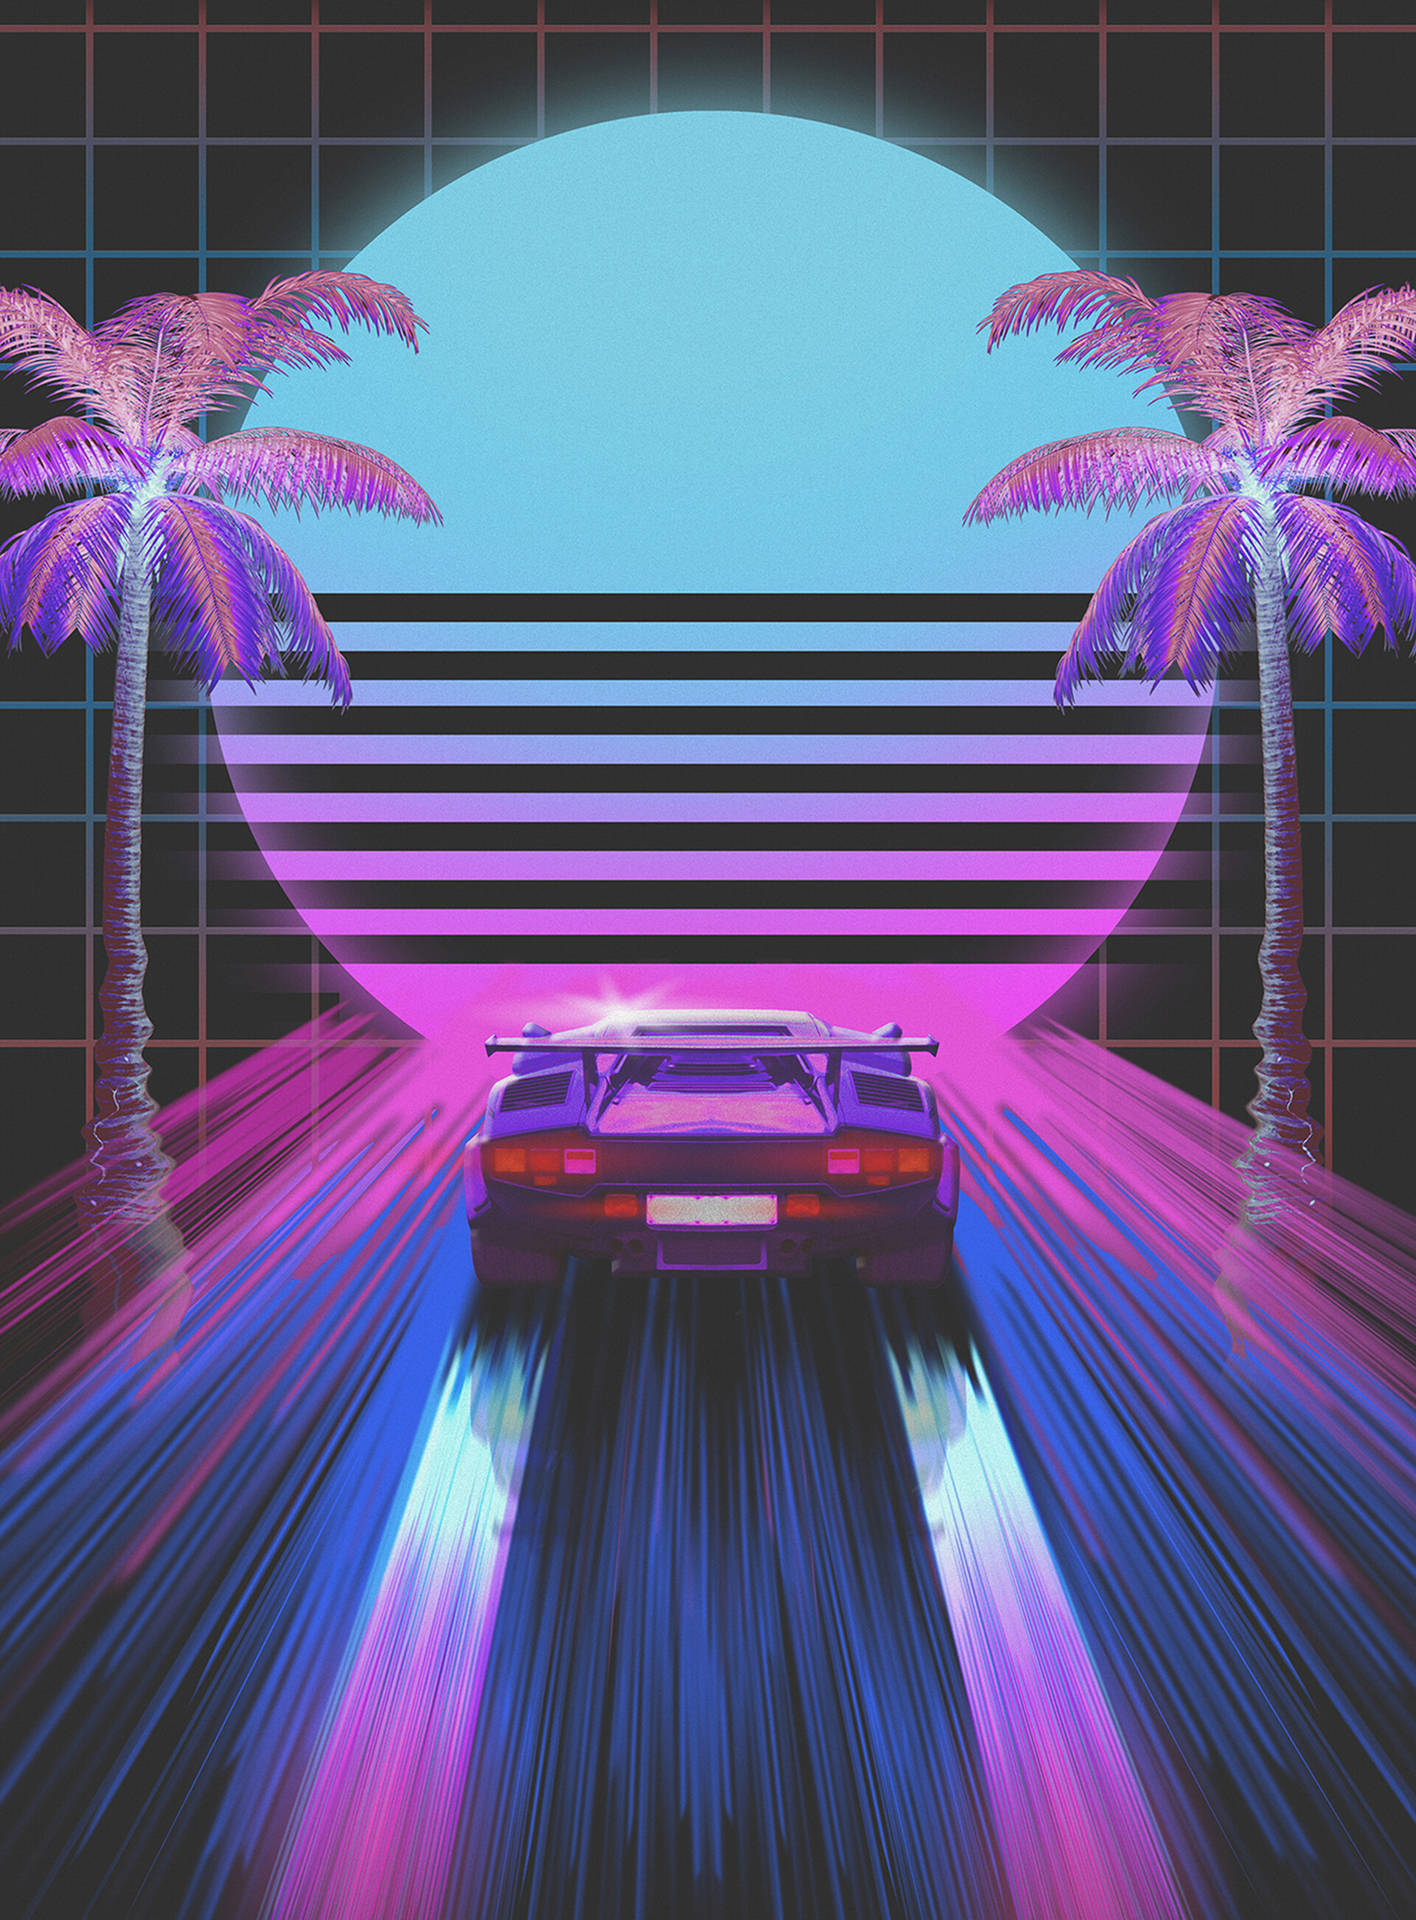 80s Style Car And Tropical Palm Background